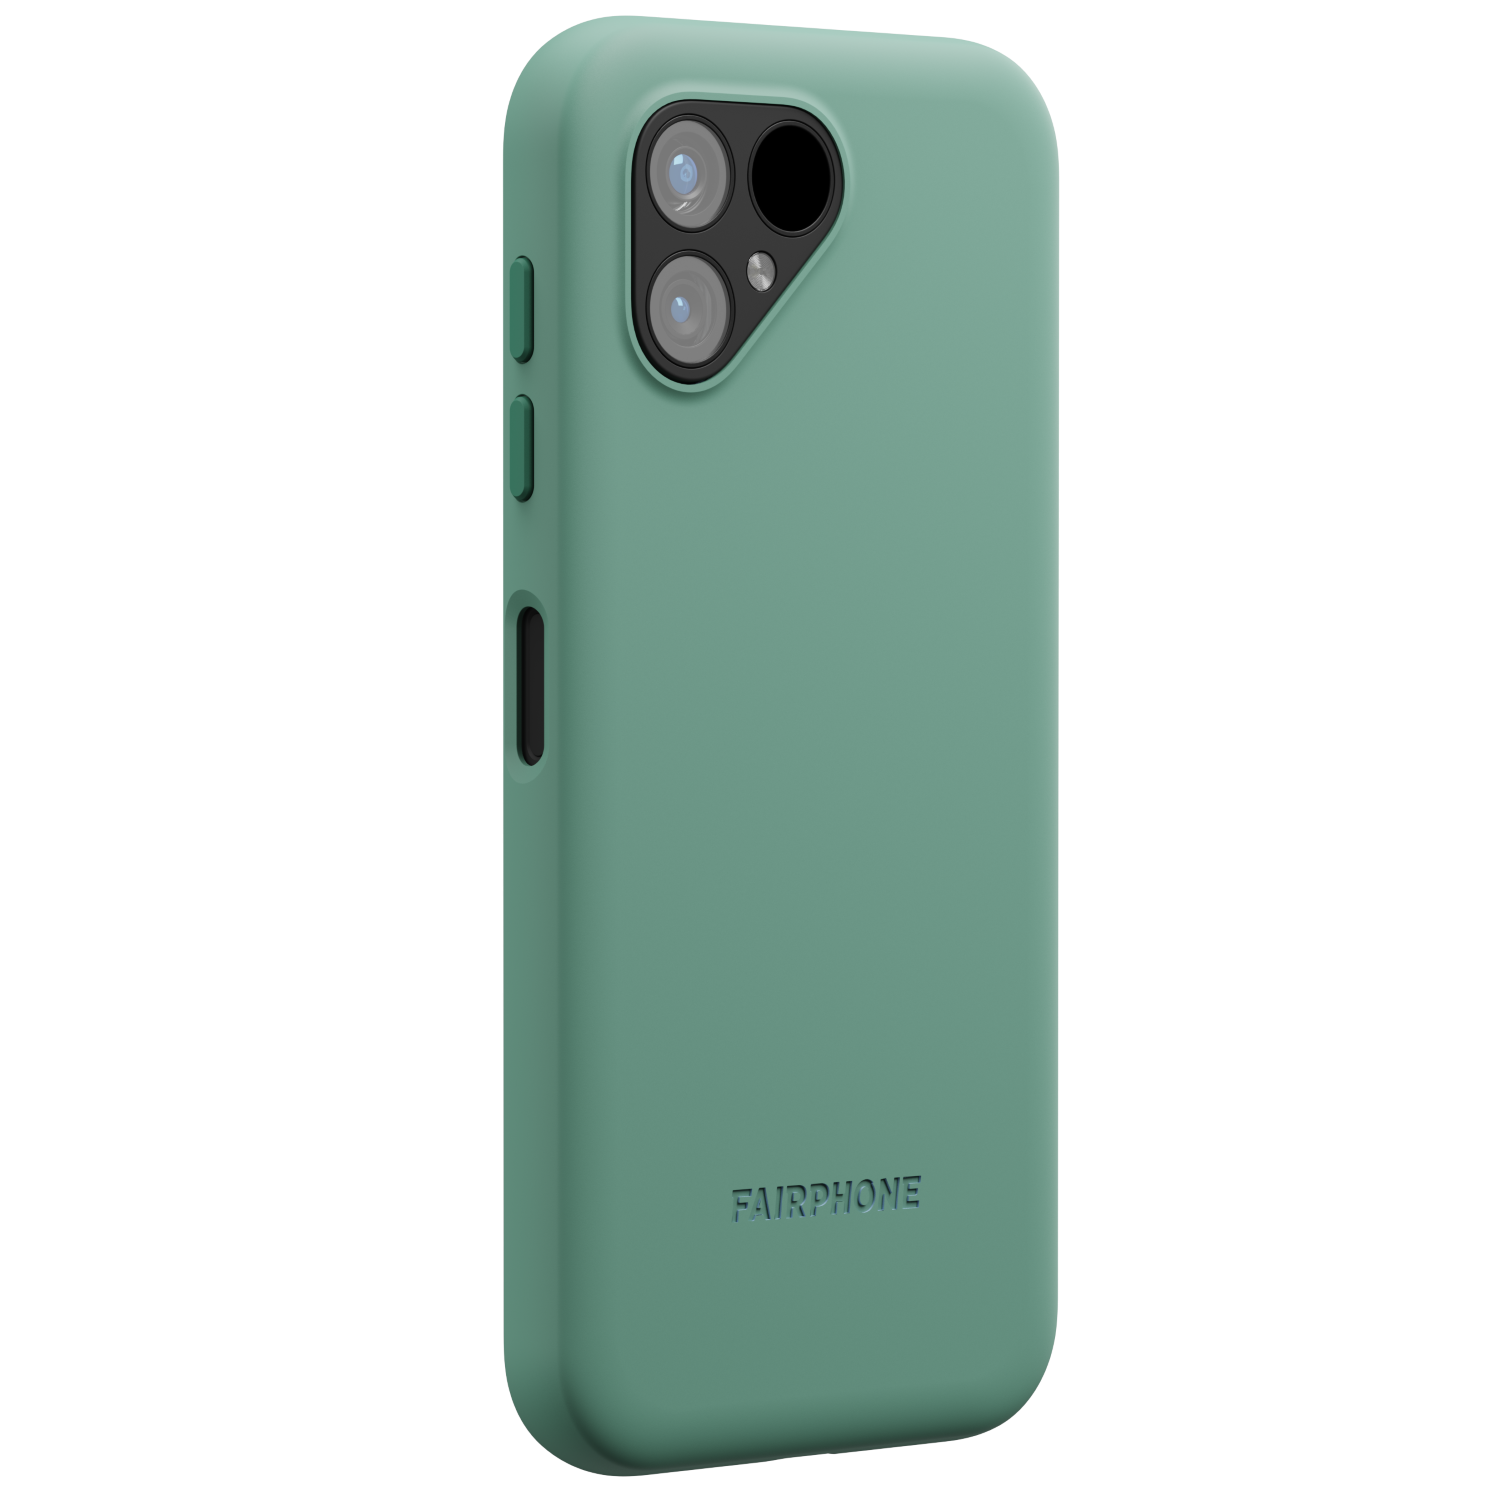 Photos - Other for Computer Fairphone 5 Moss Green Protective Case F5CASE-1GR-WW1 